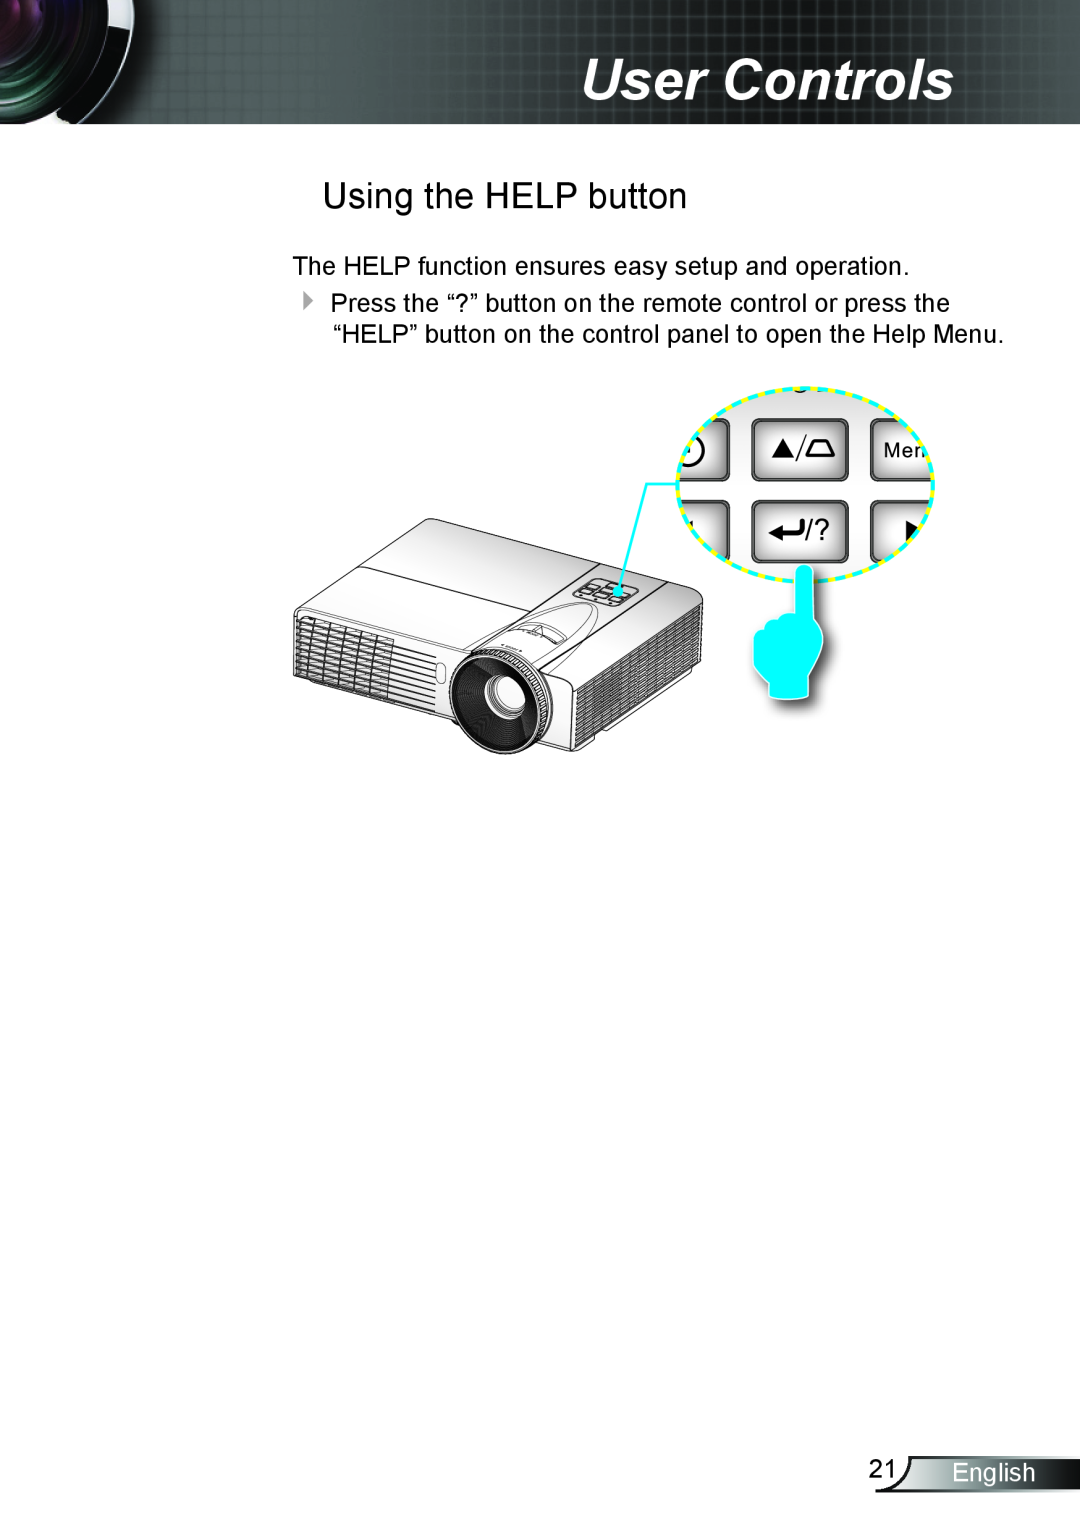 Optoma Technology DX339, TW5563D, DW339, DS339 manual English, User Controls, Using the HELP button 